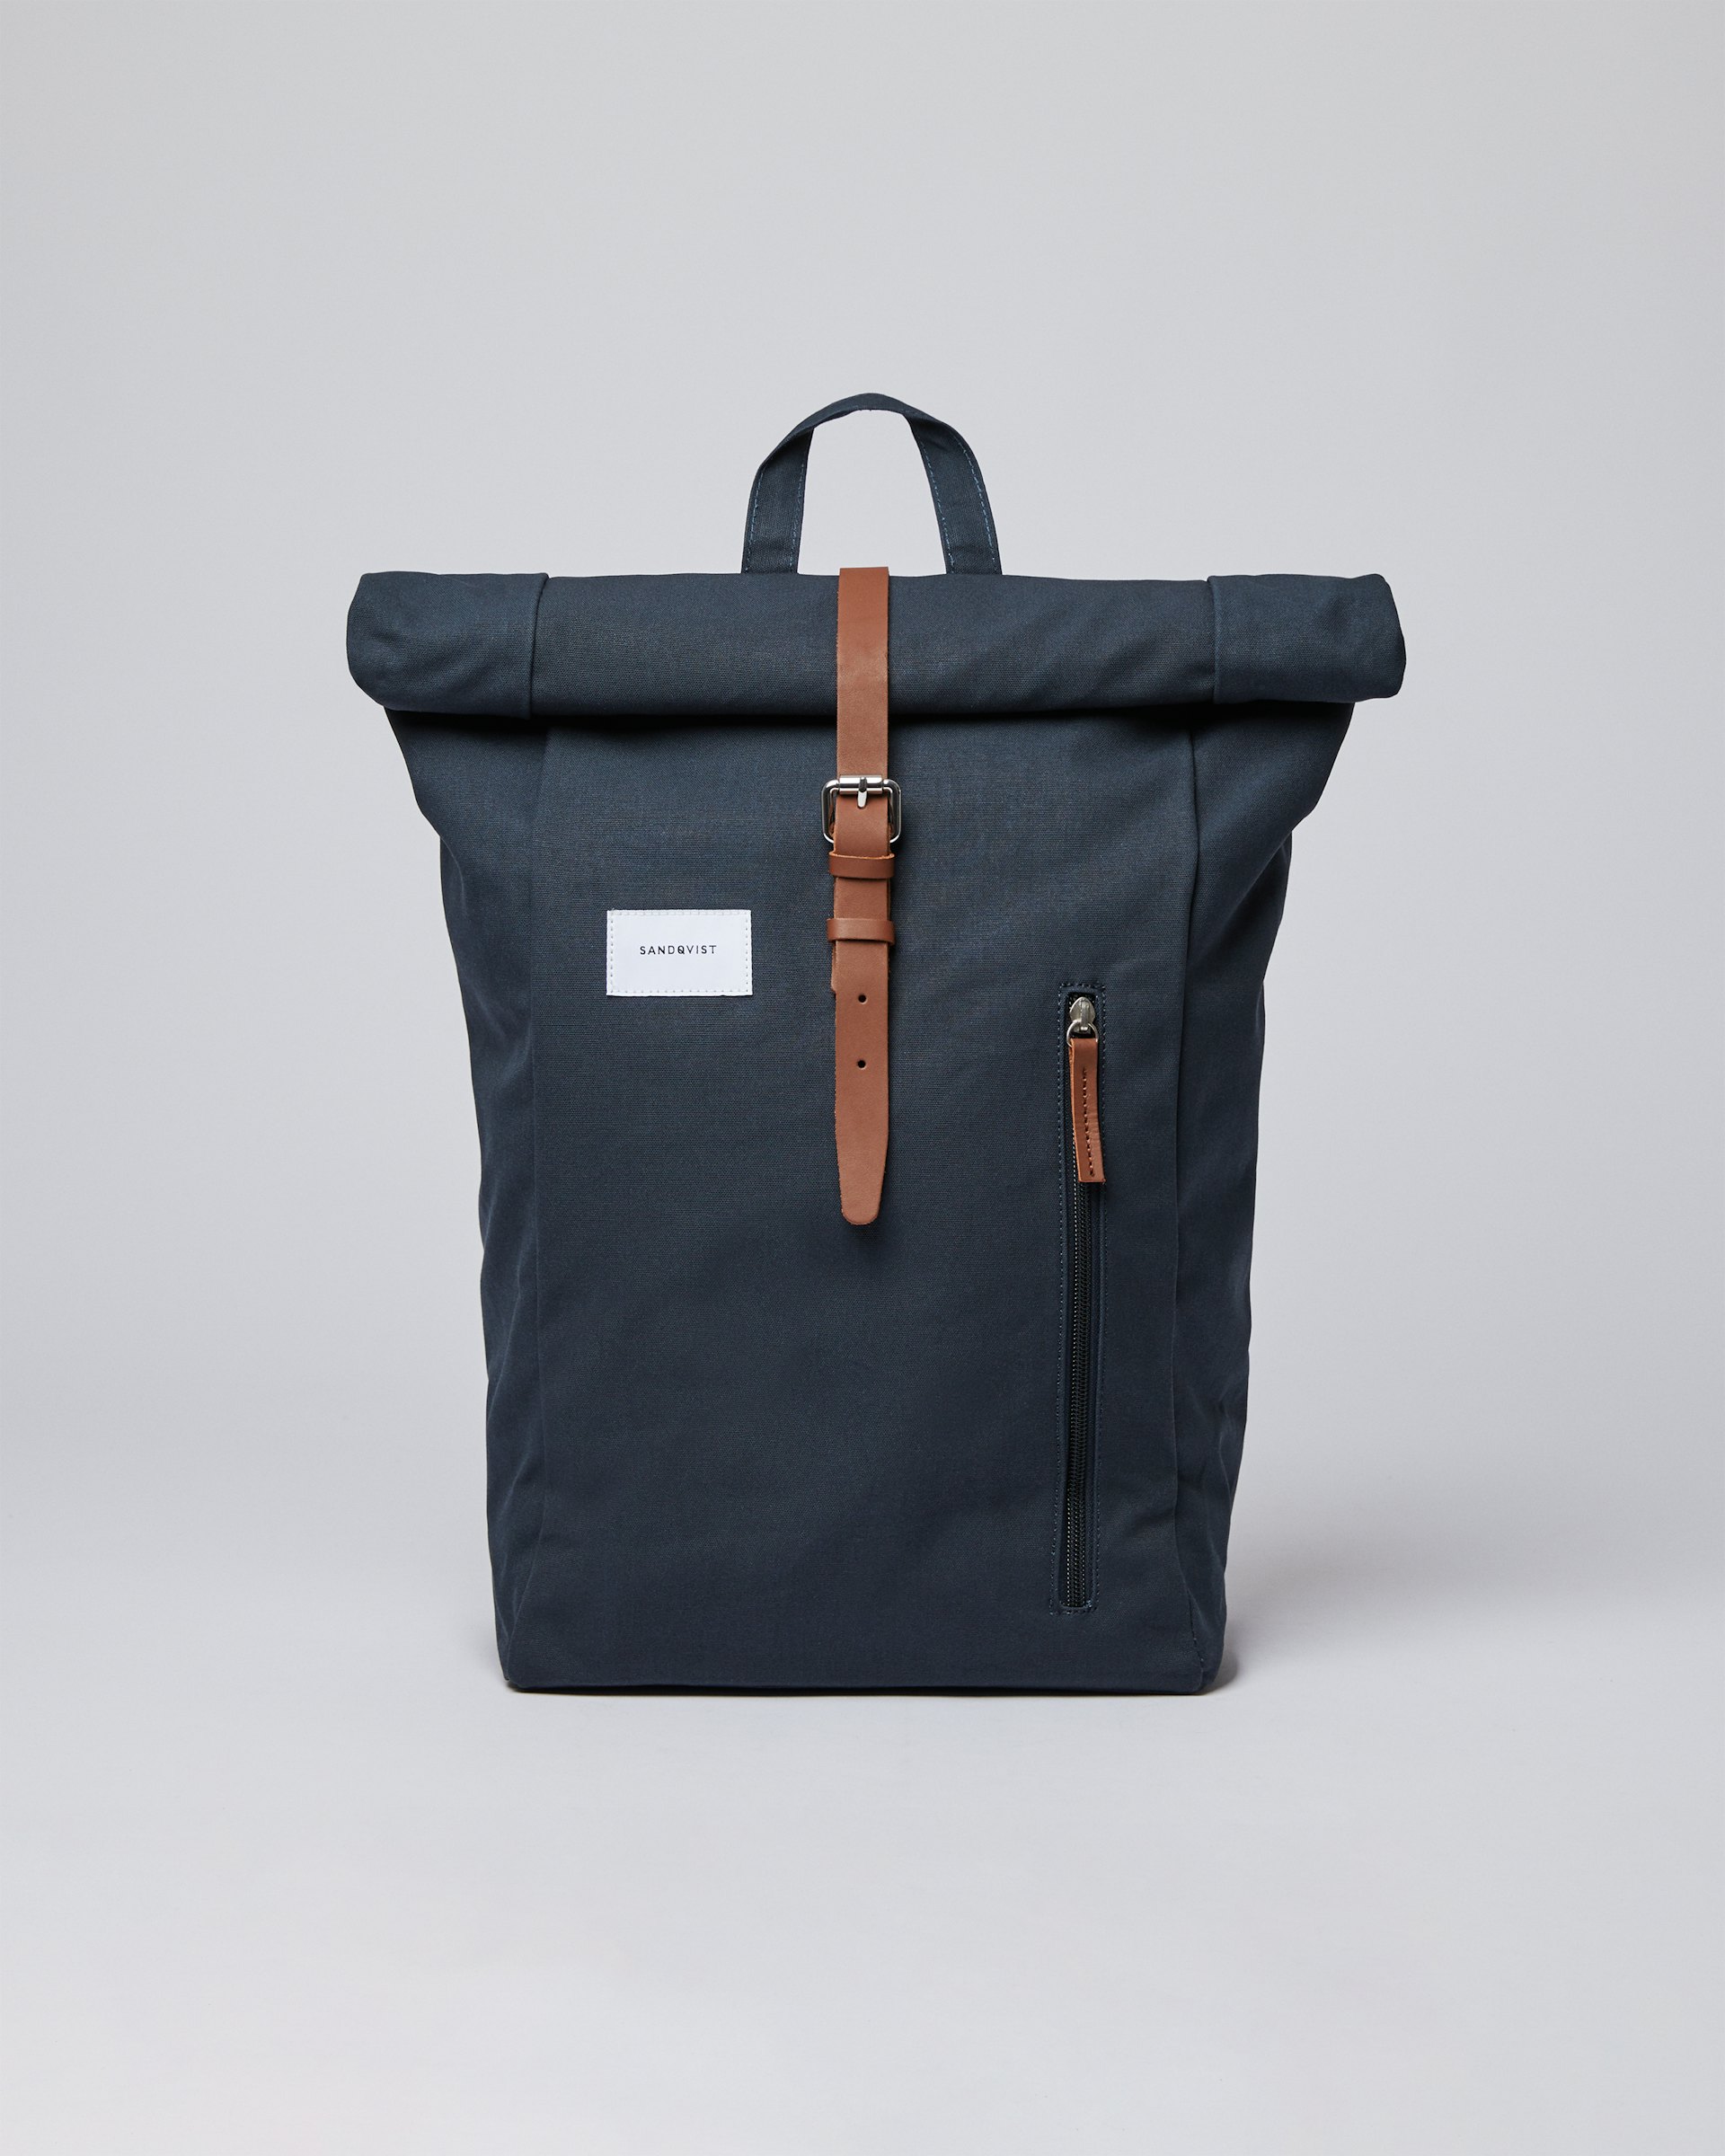 Dante belongs to the category Sacs à dos and is in color navy